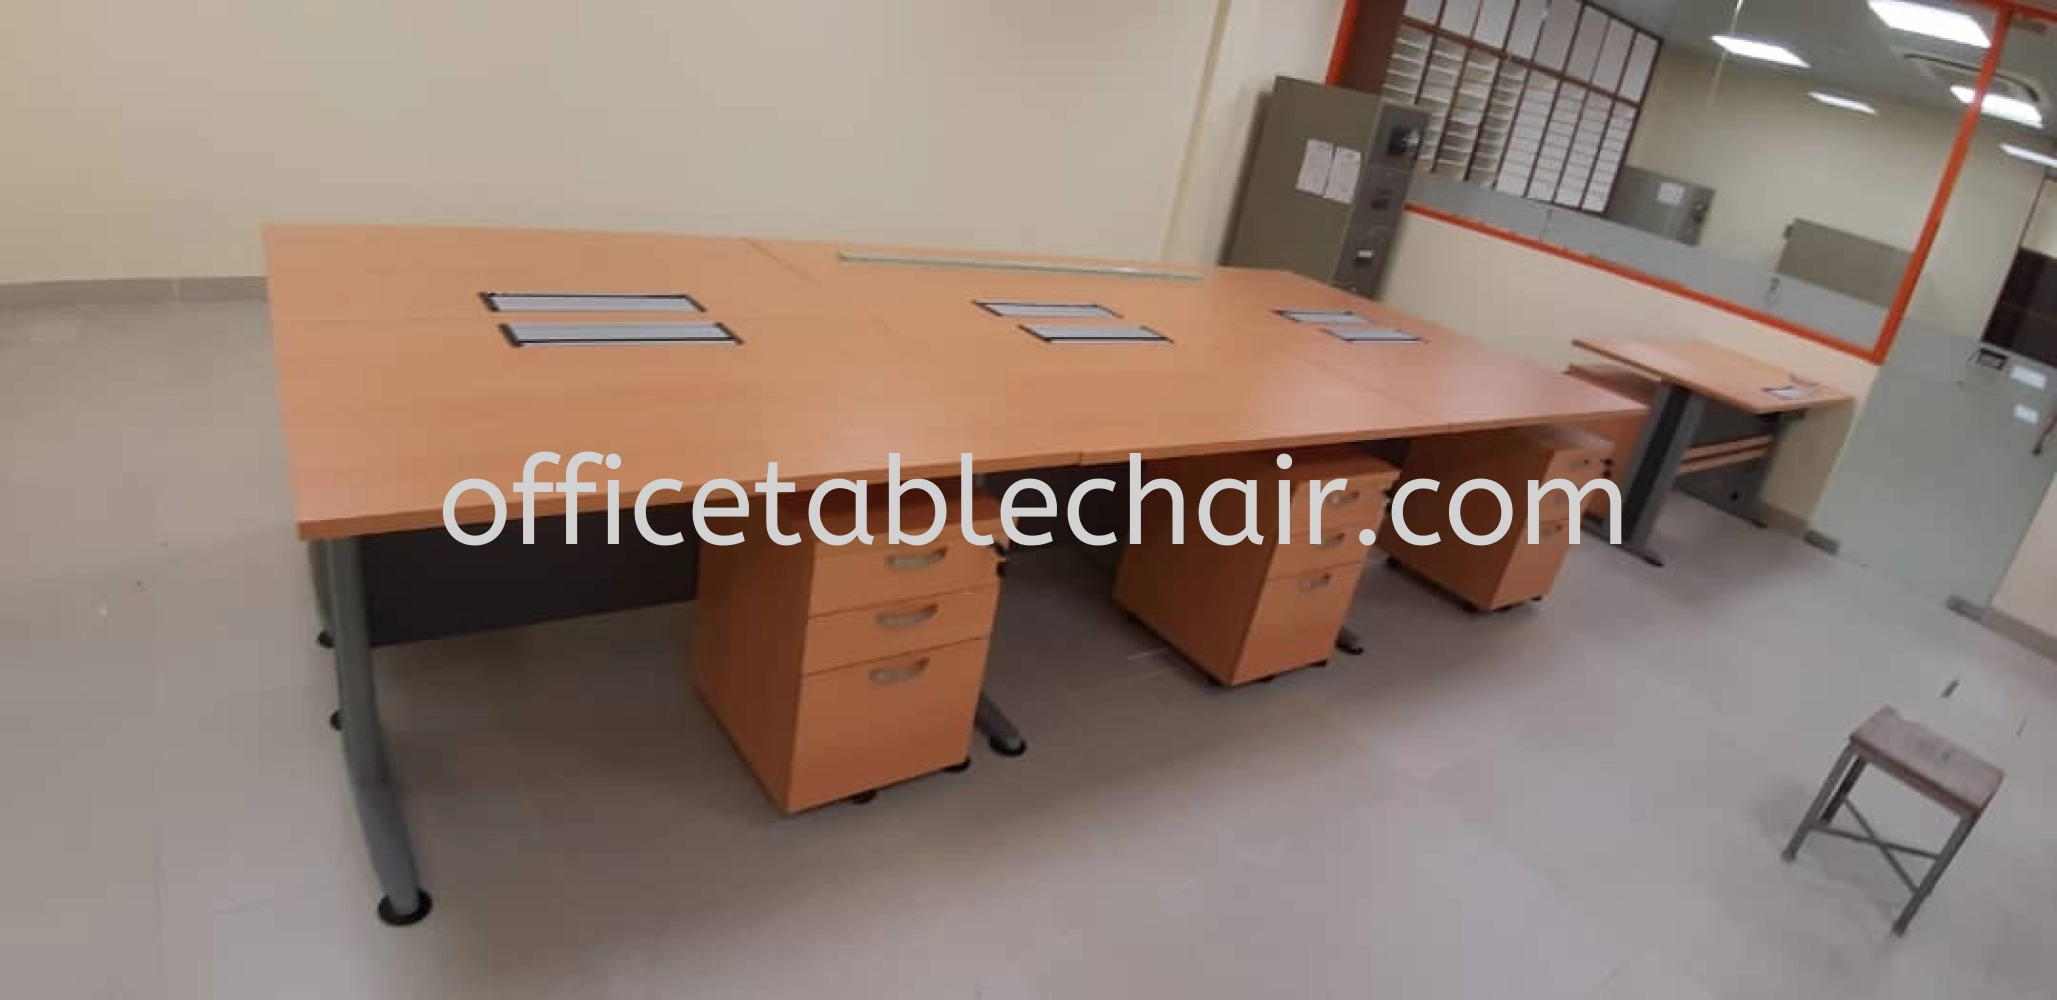 Delivery & Installation Office Furniture One City, Subang Jaya